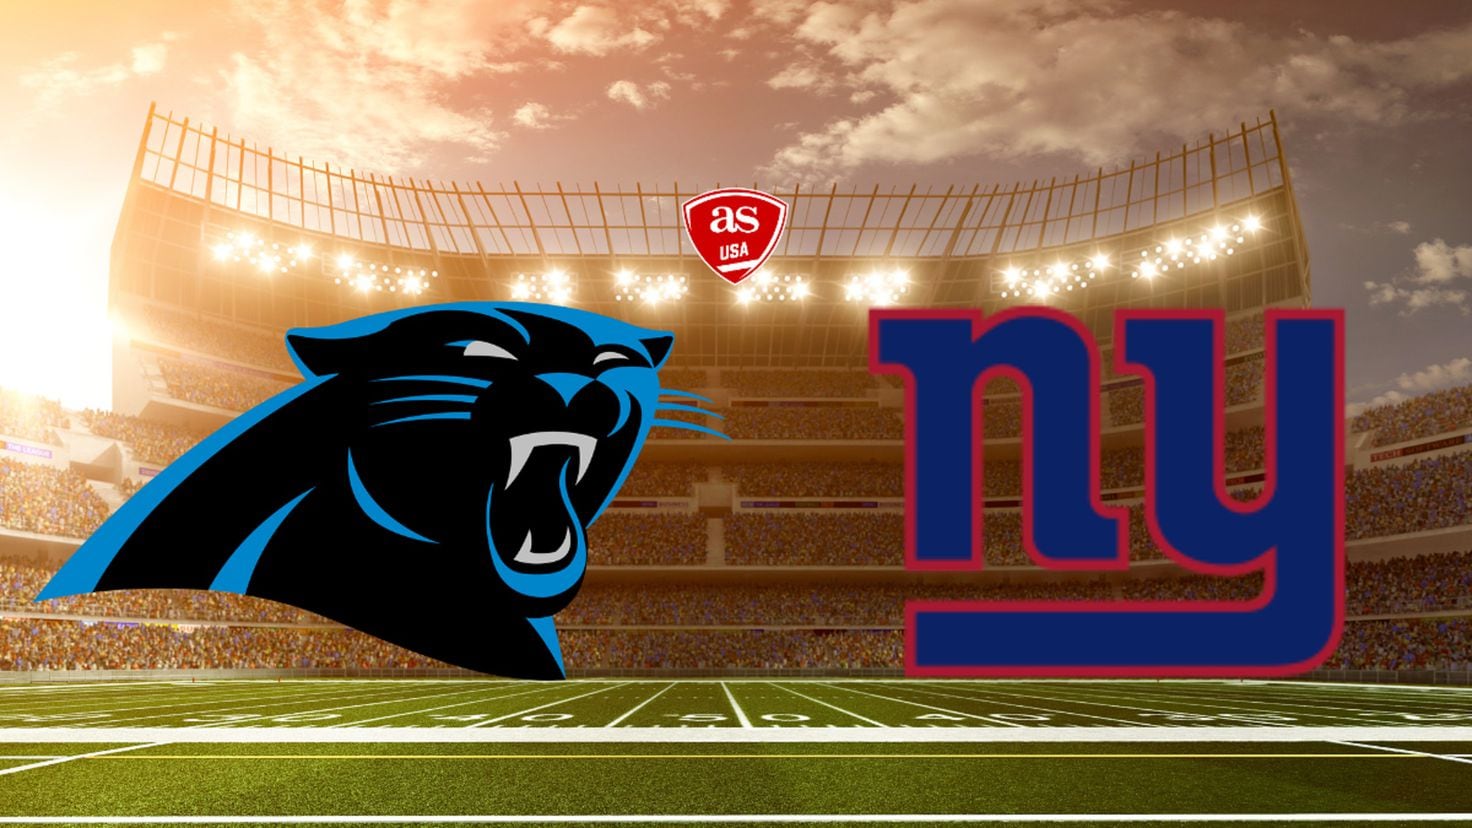 Carolina Panthers vs New York Giants times, how to watch on TV, stream